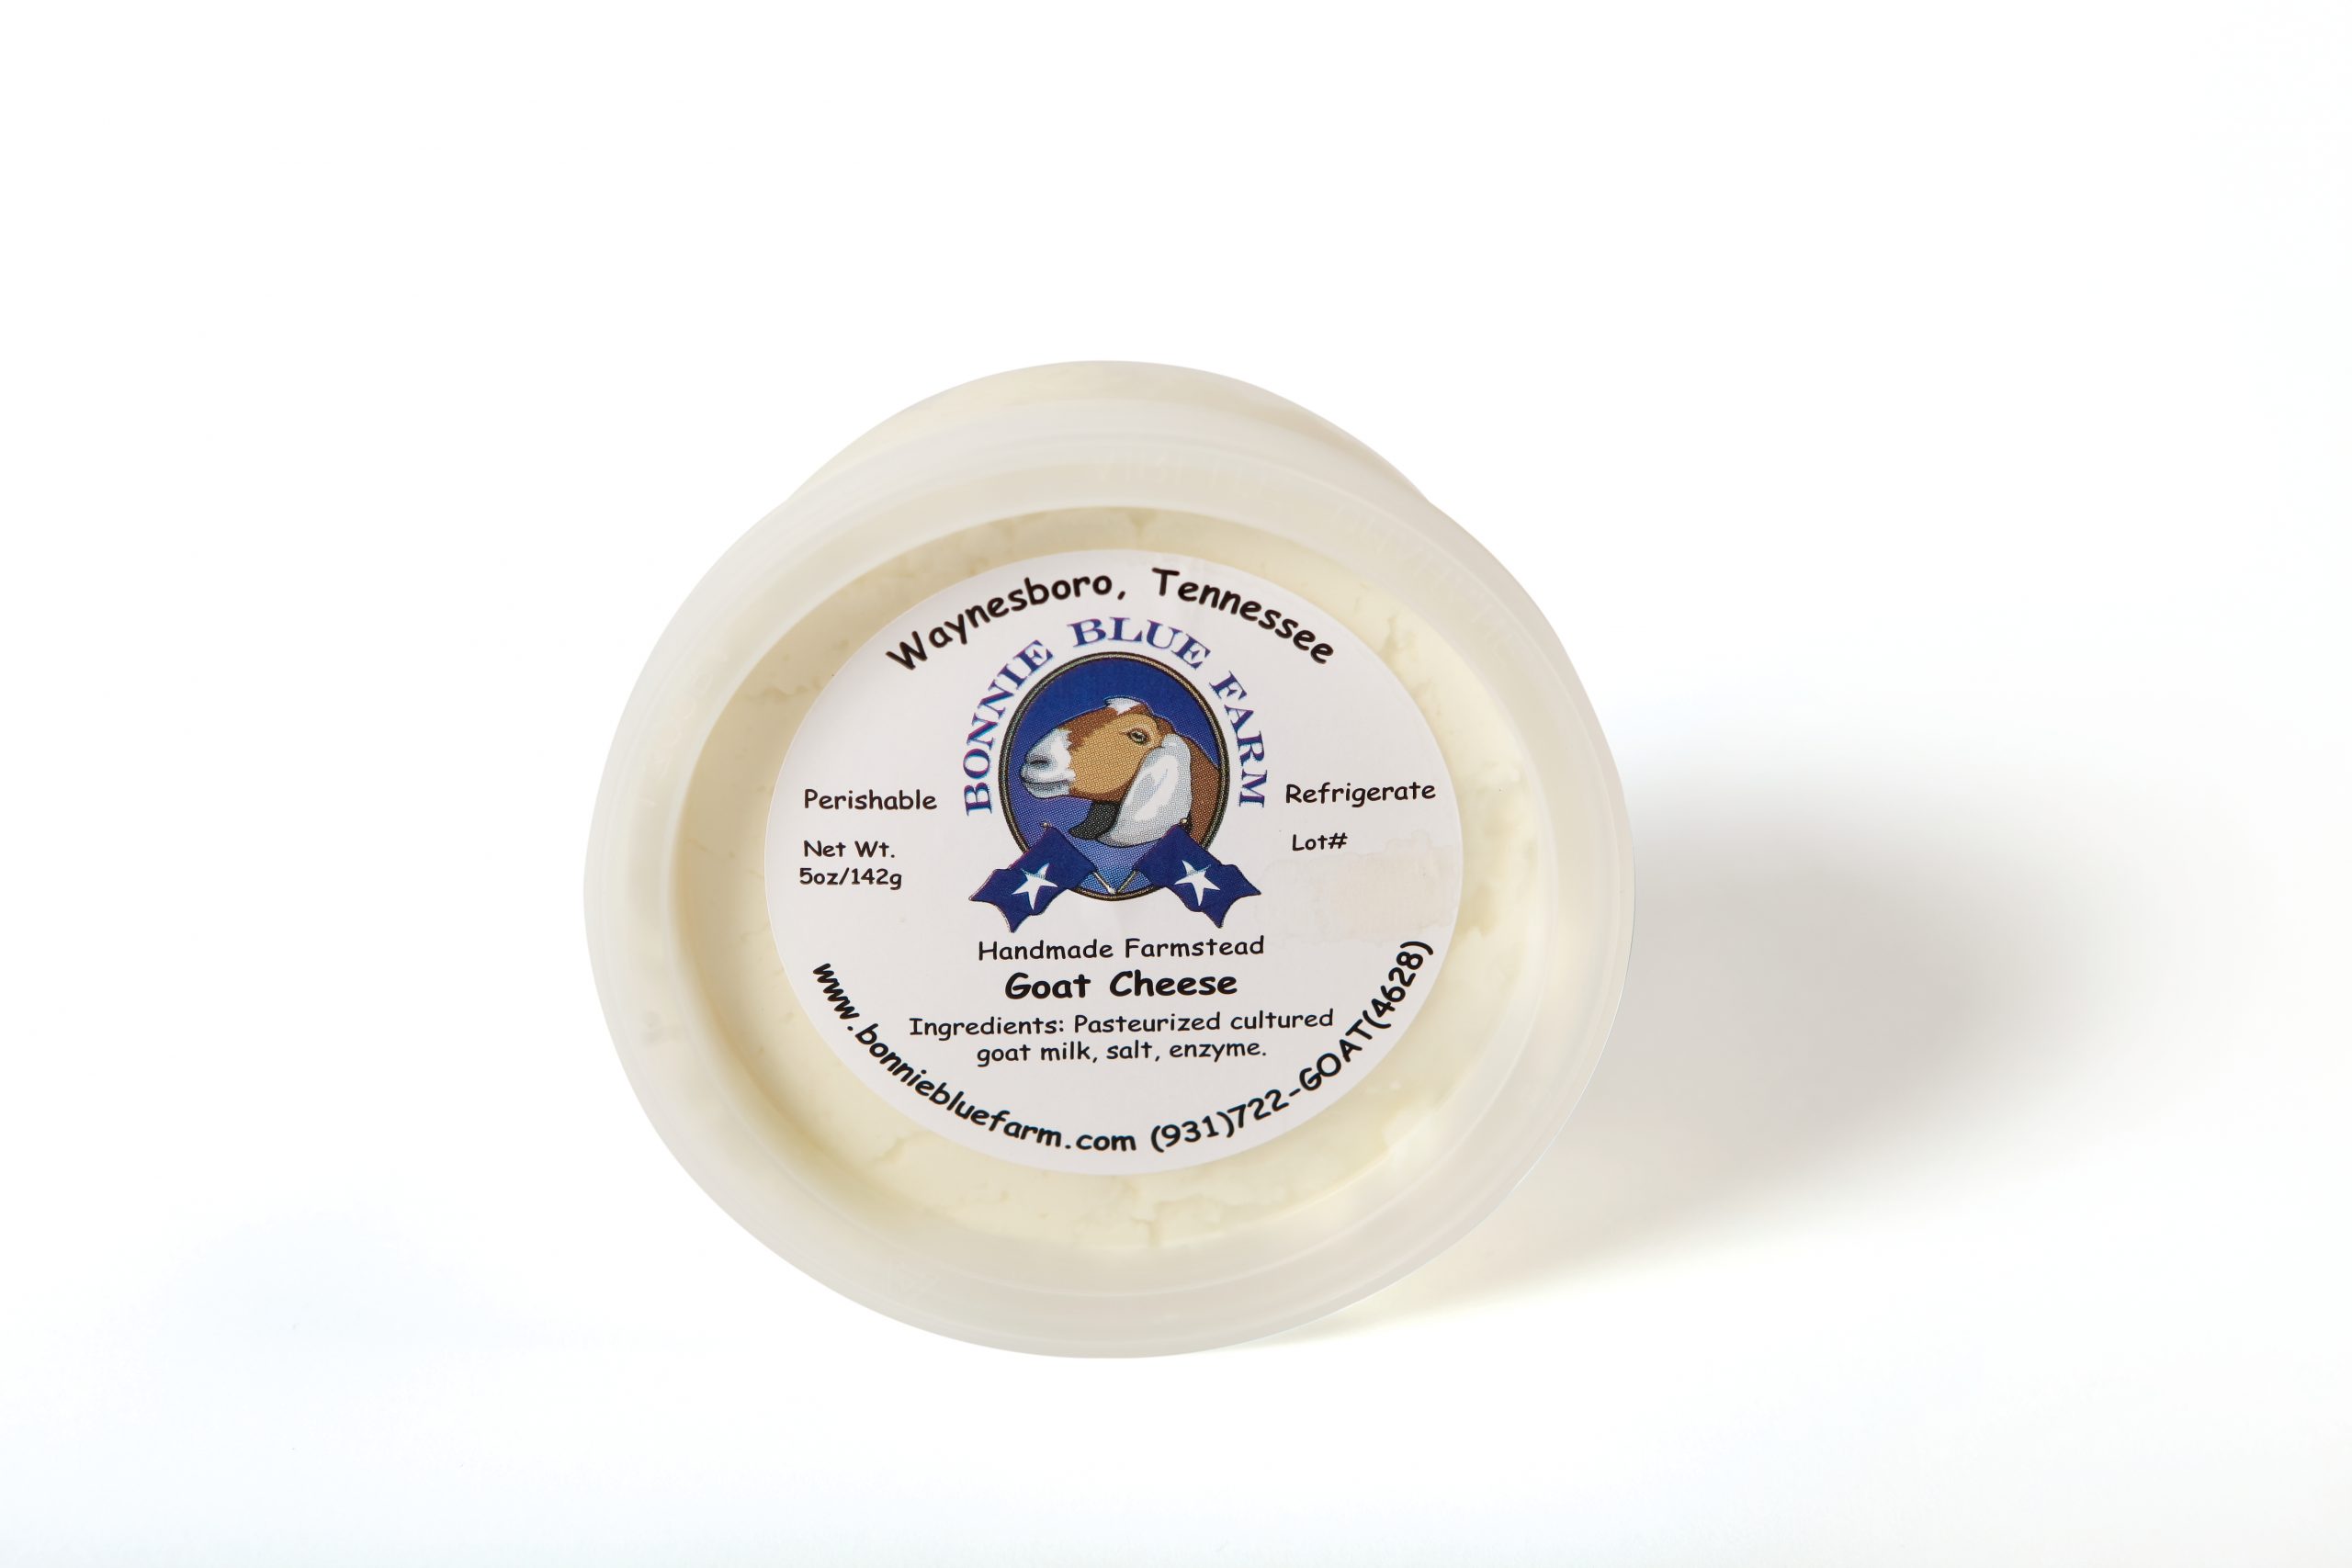 Bonnie Blue Goat Cheese in Waynseboro, Tennessee